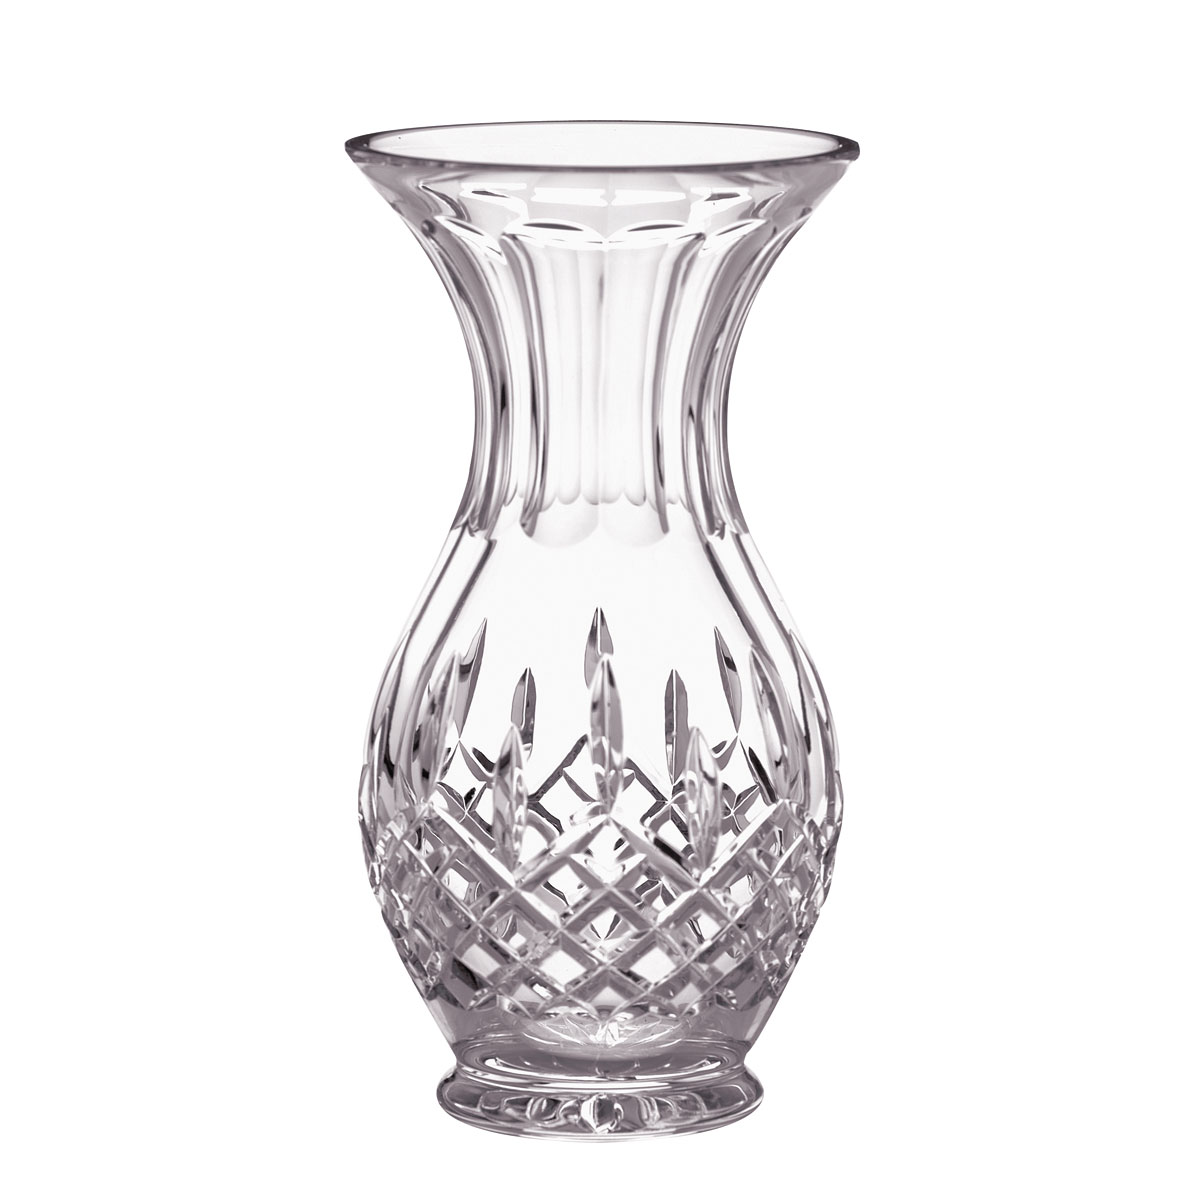 Galway Crystal Longford 8" Footed Bulb Vase